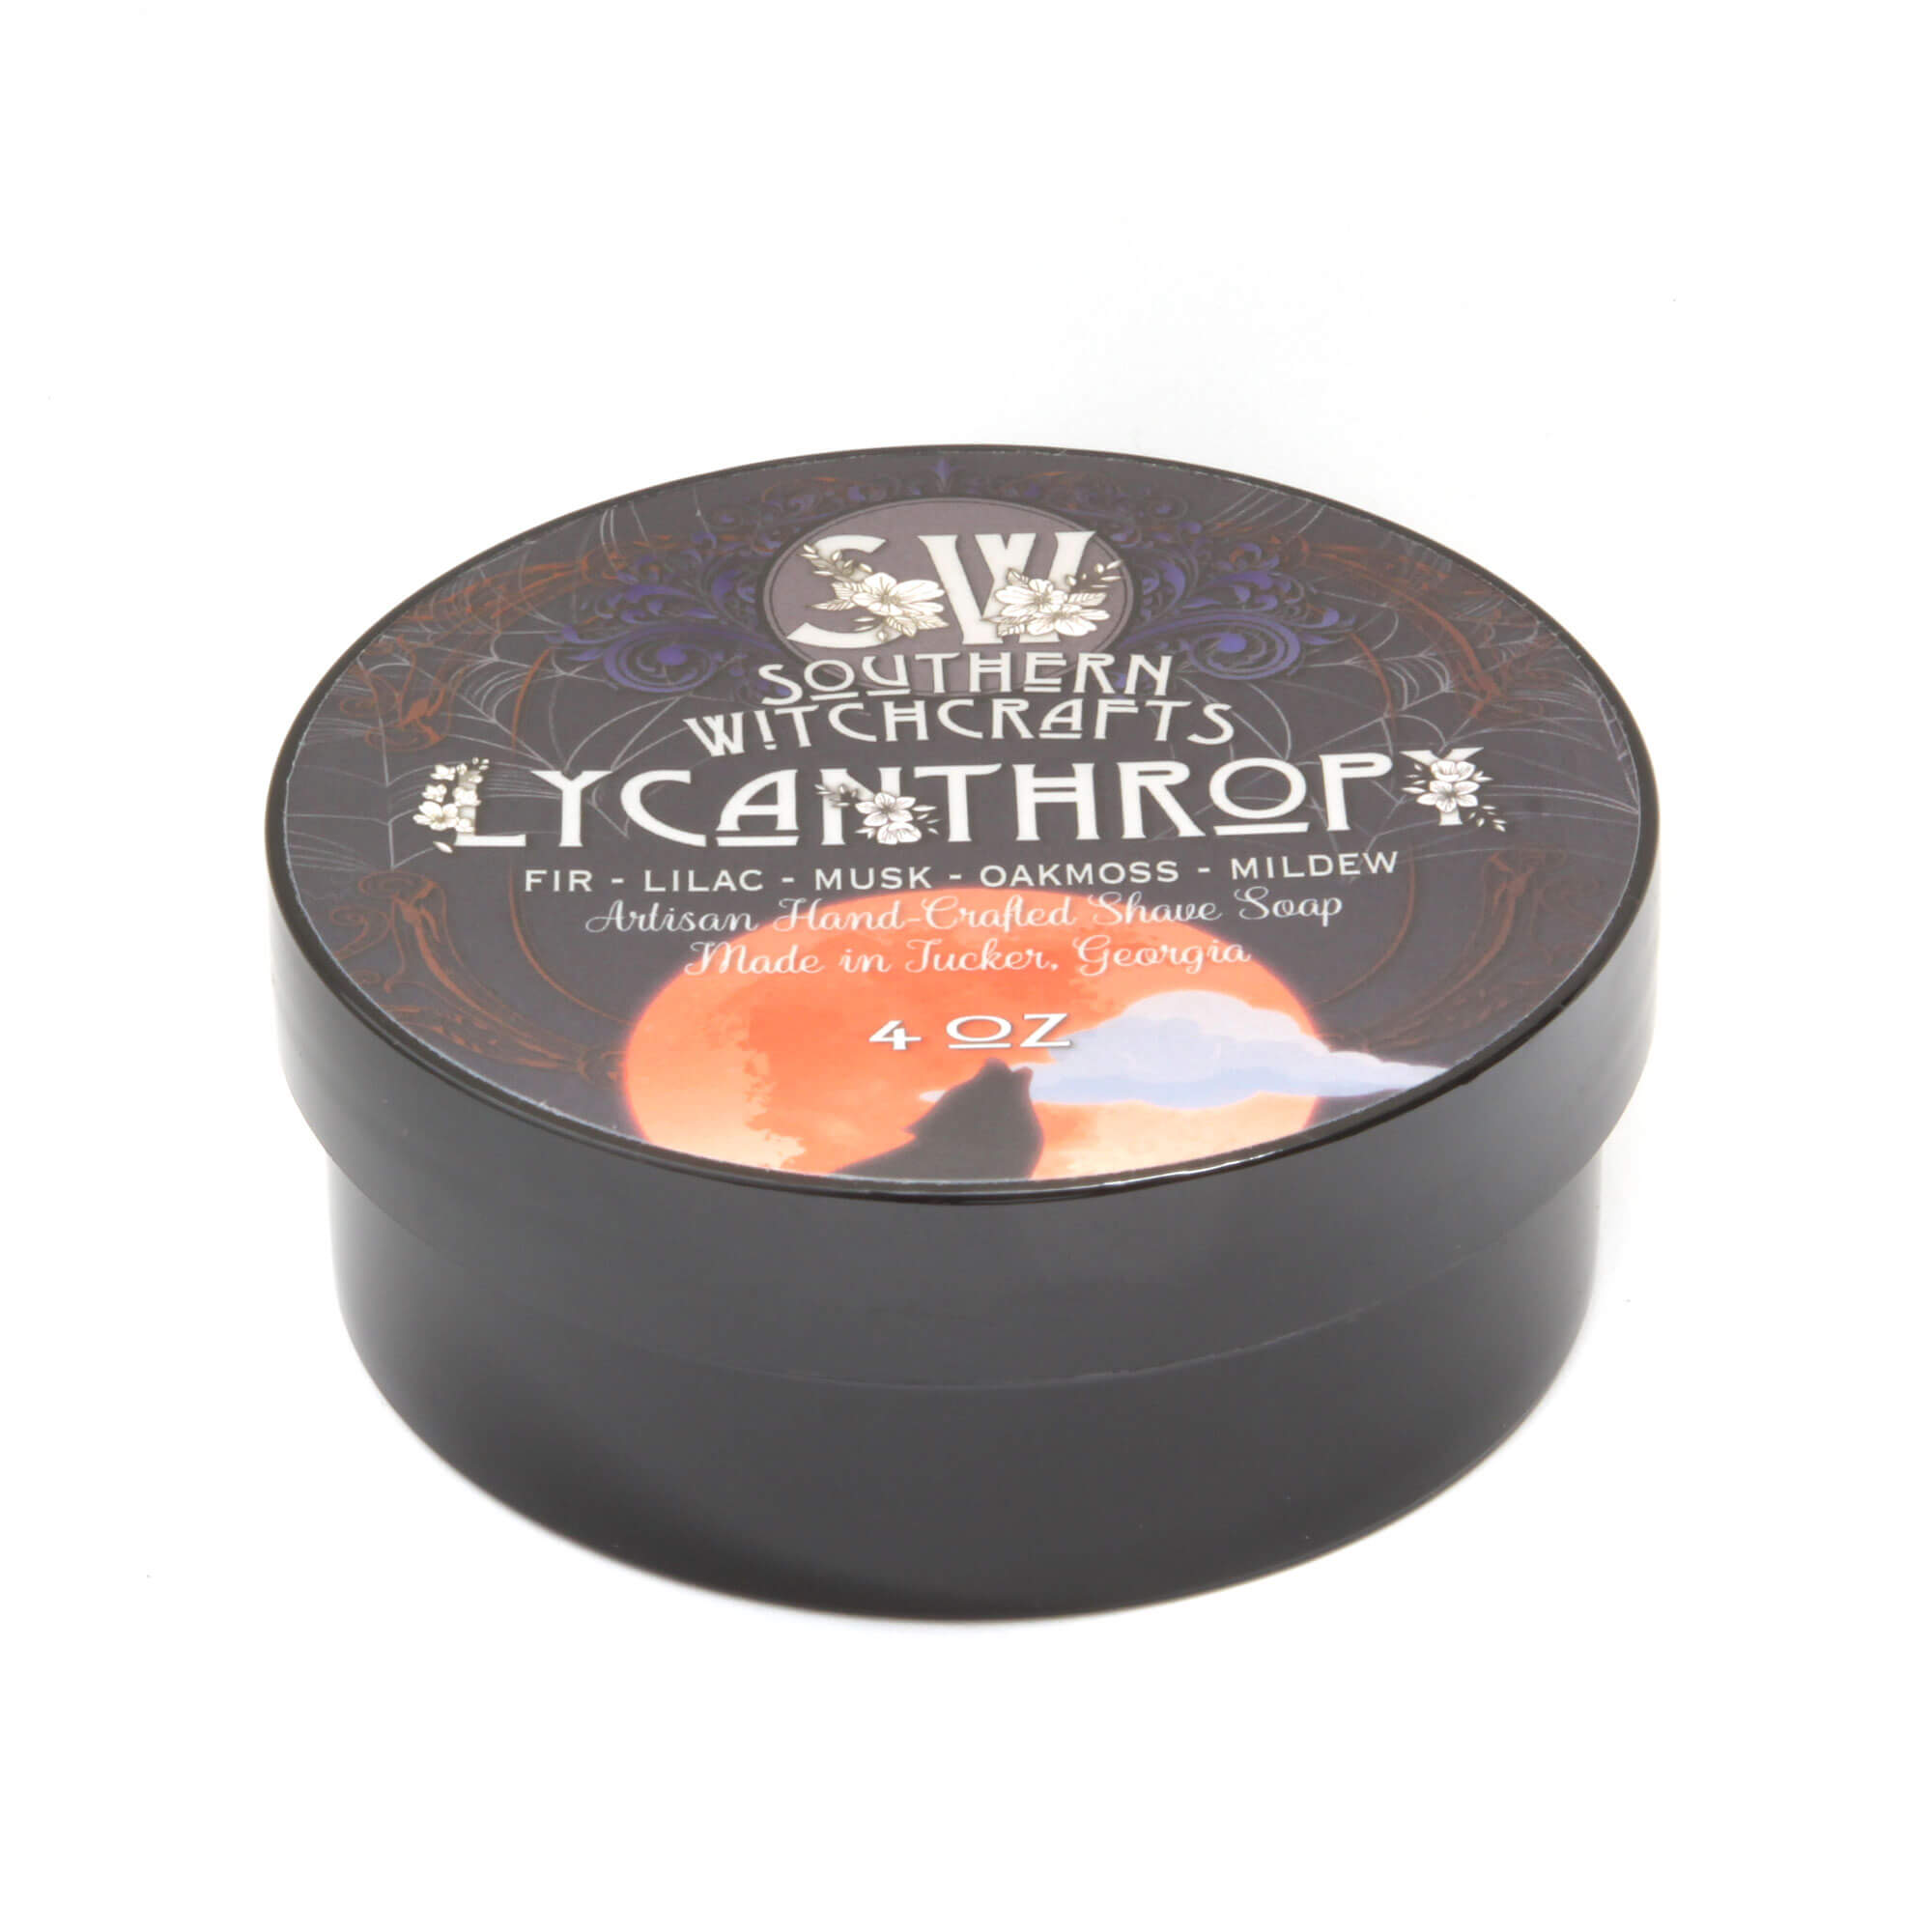 Southern Witchcrafts Lycanthropy Shaving Soap